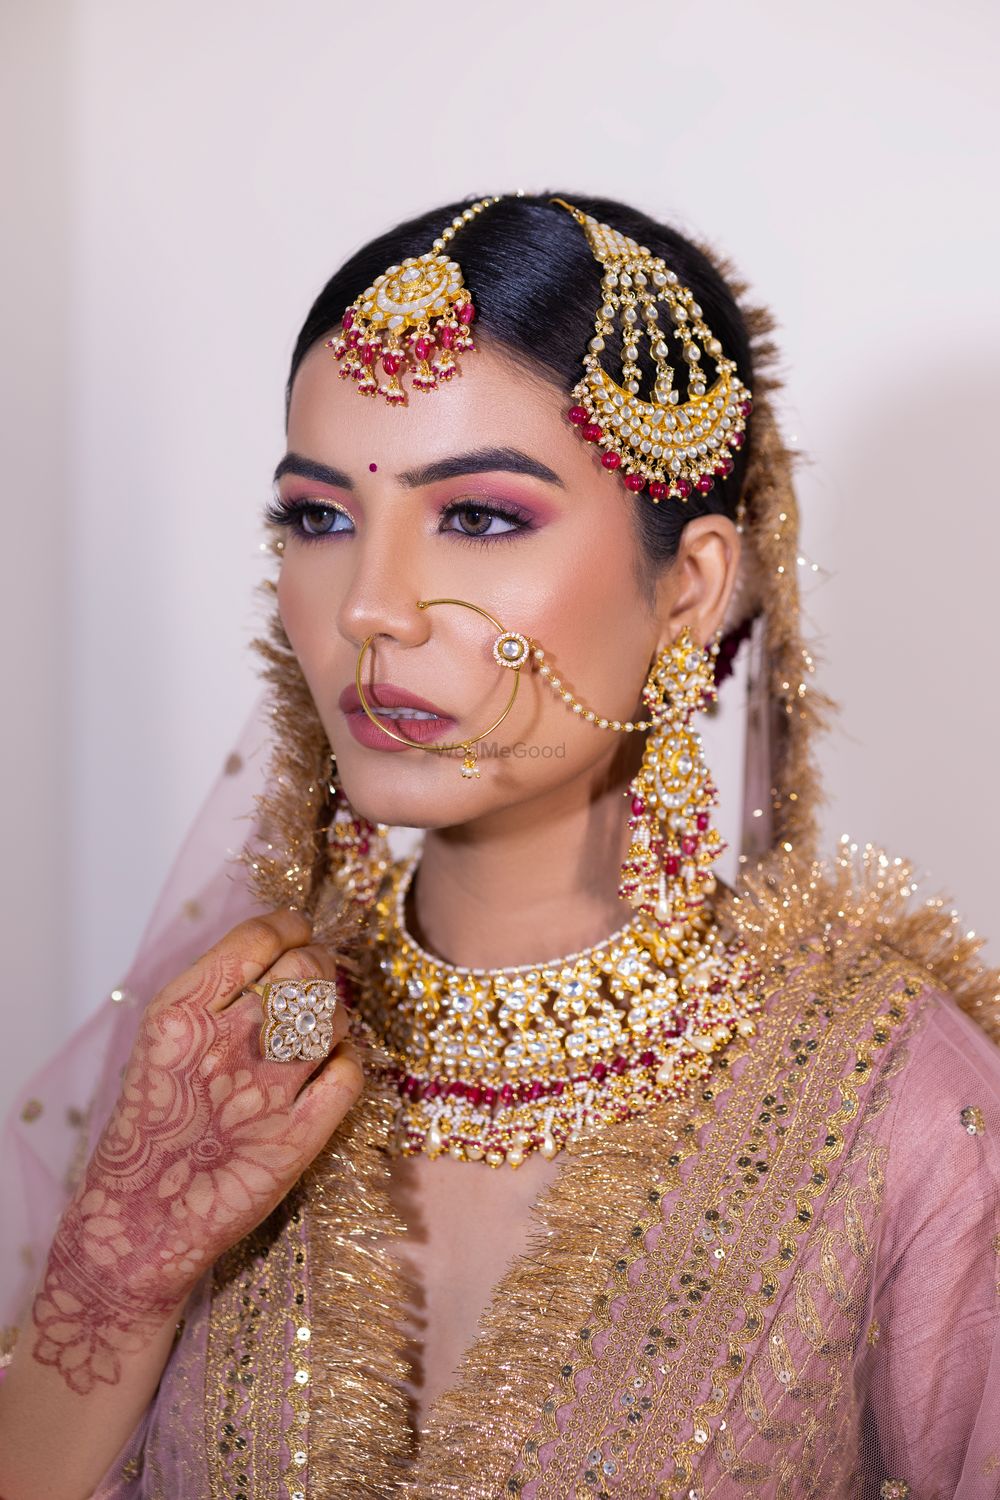 Photo From Bridal makeup  - By Makeup by Meher Bhatia